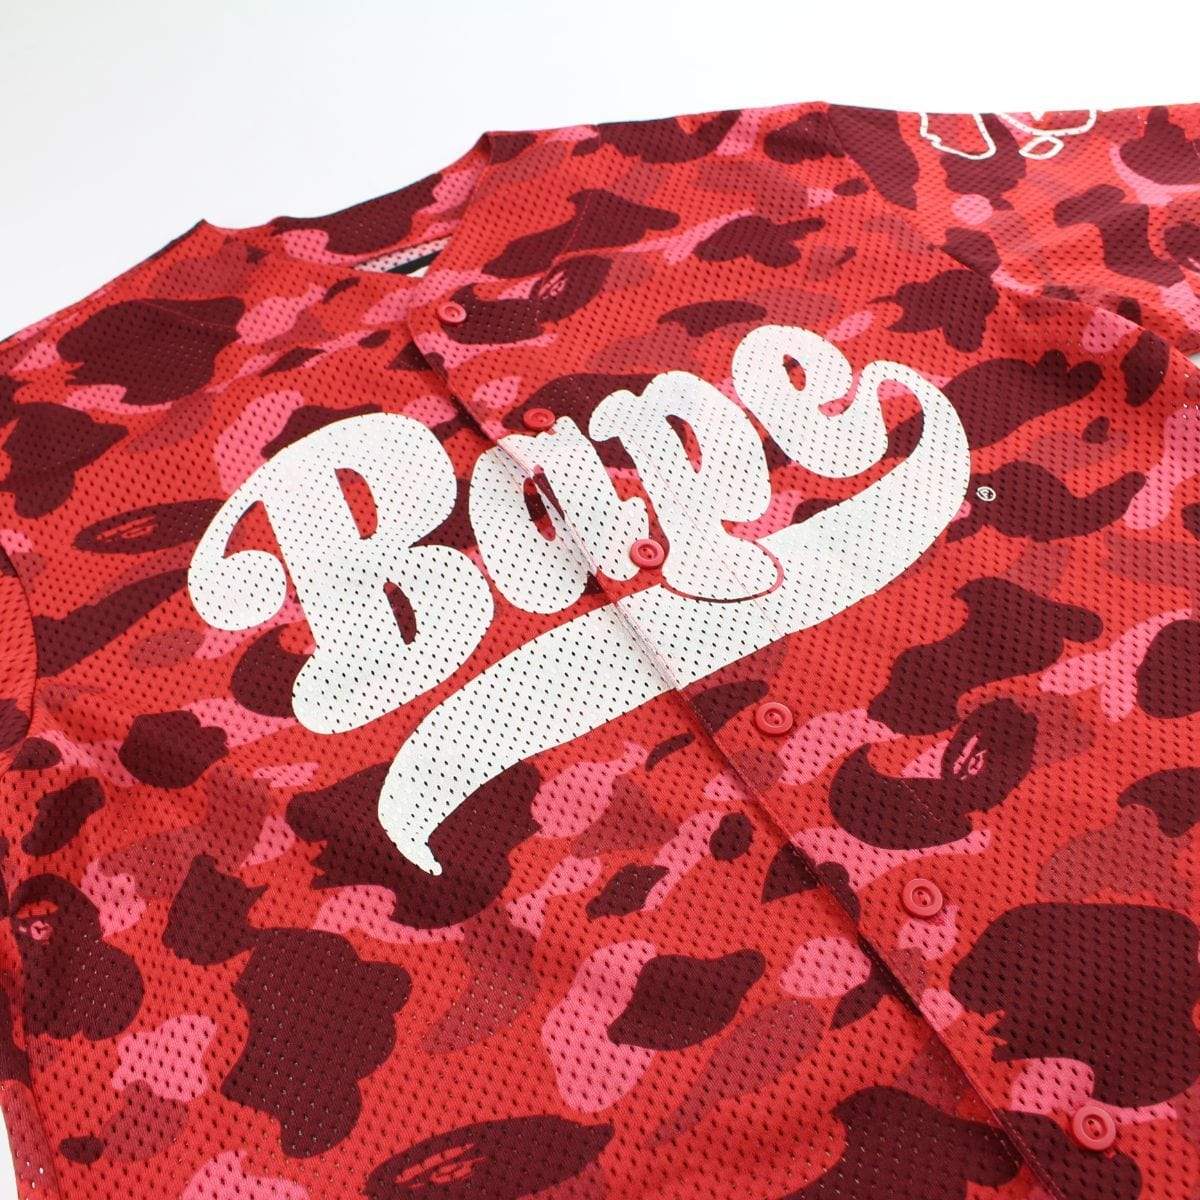 bape red camo mesh jersey - SaruGeneral